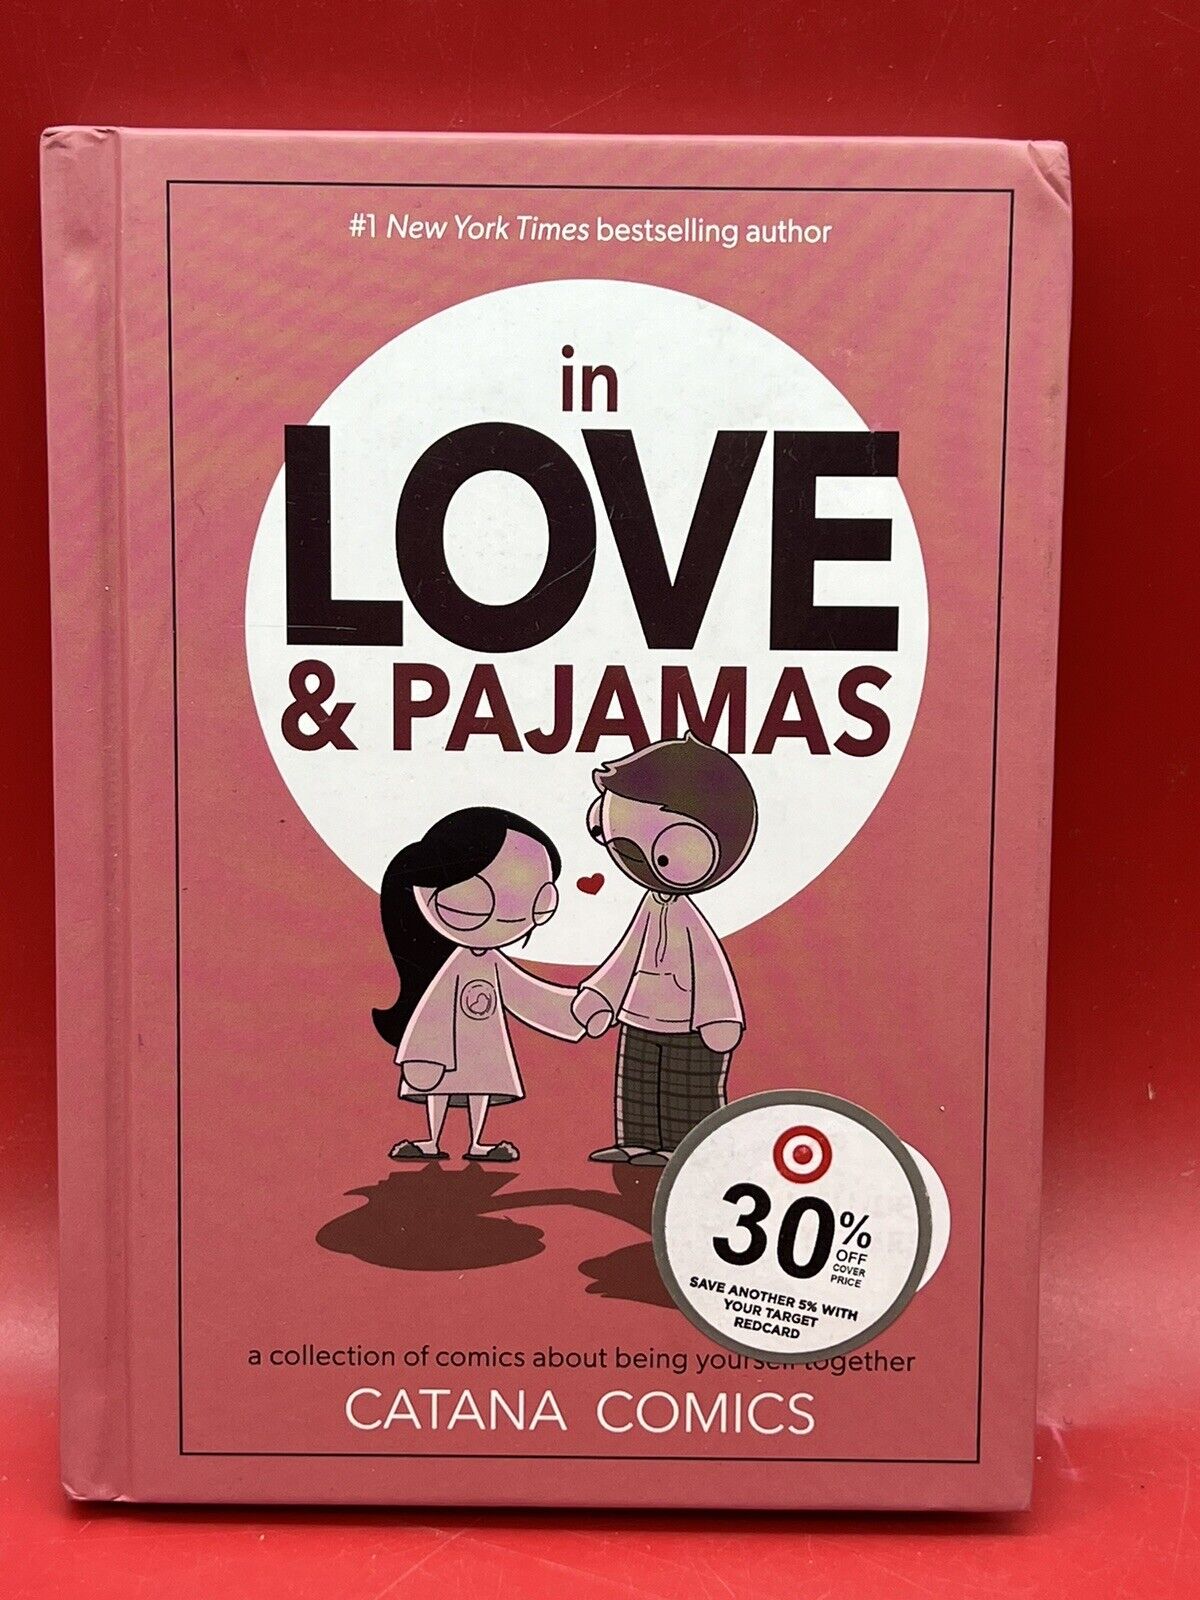 In Love & Pajamas: a Collection of Comics about Being Yourself Together